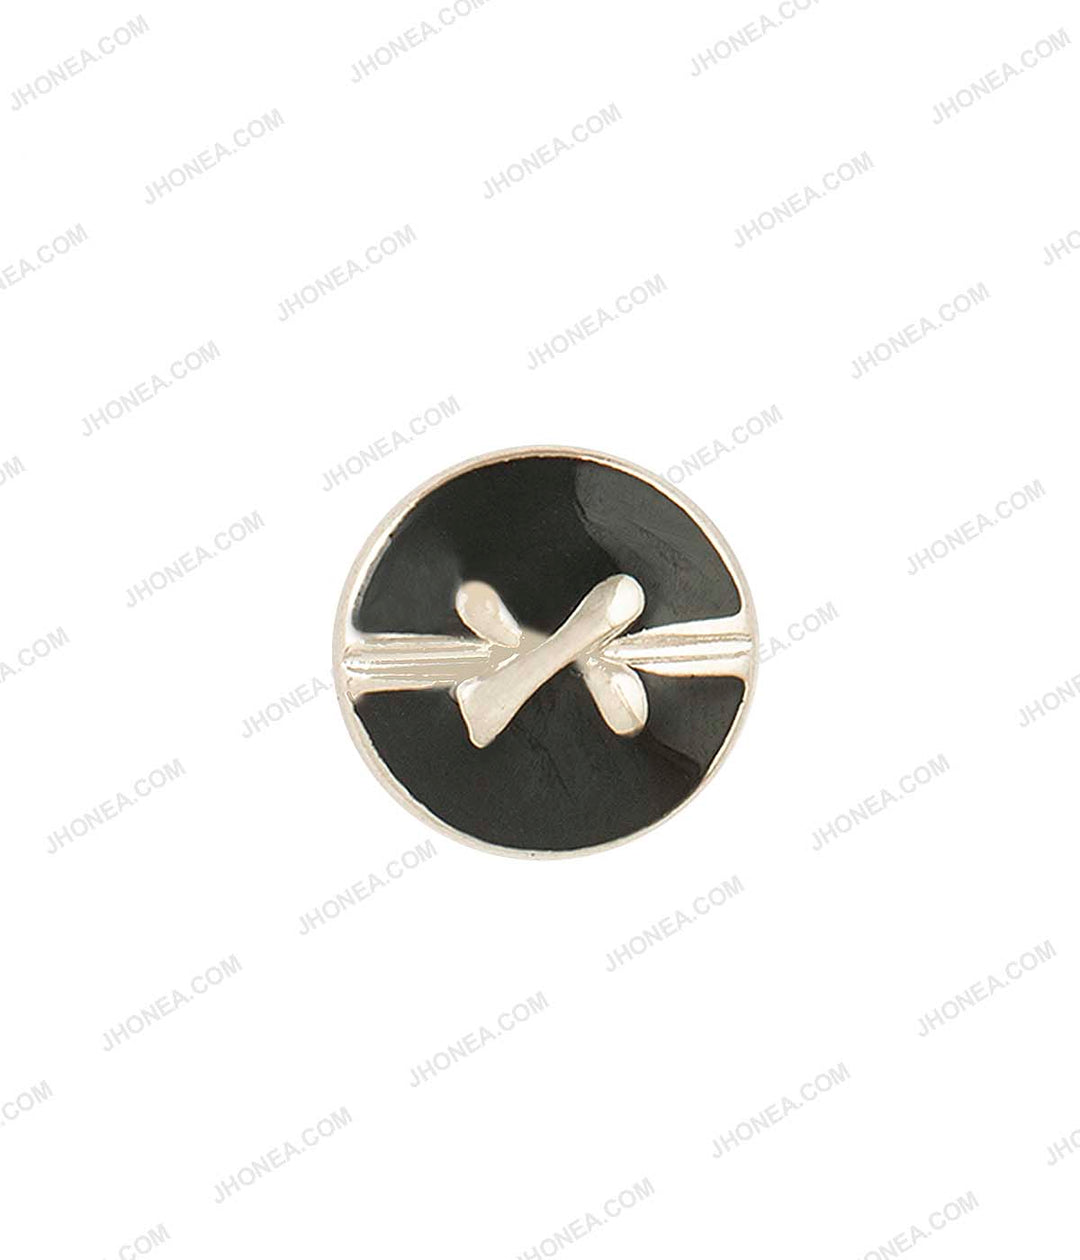 Black Enamel Shiny Silver Bow Design Surface Buttons for Shirts